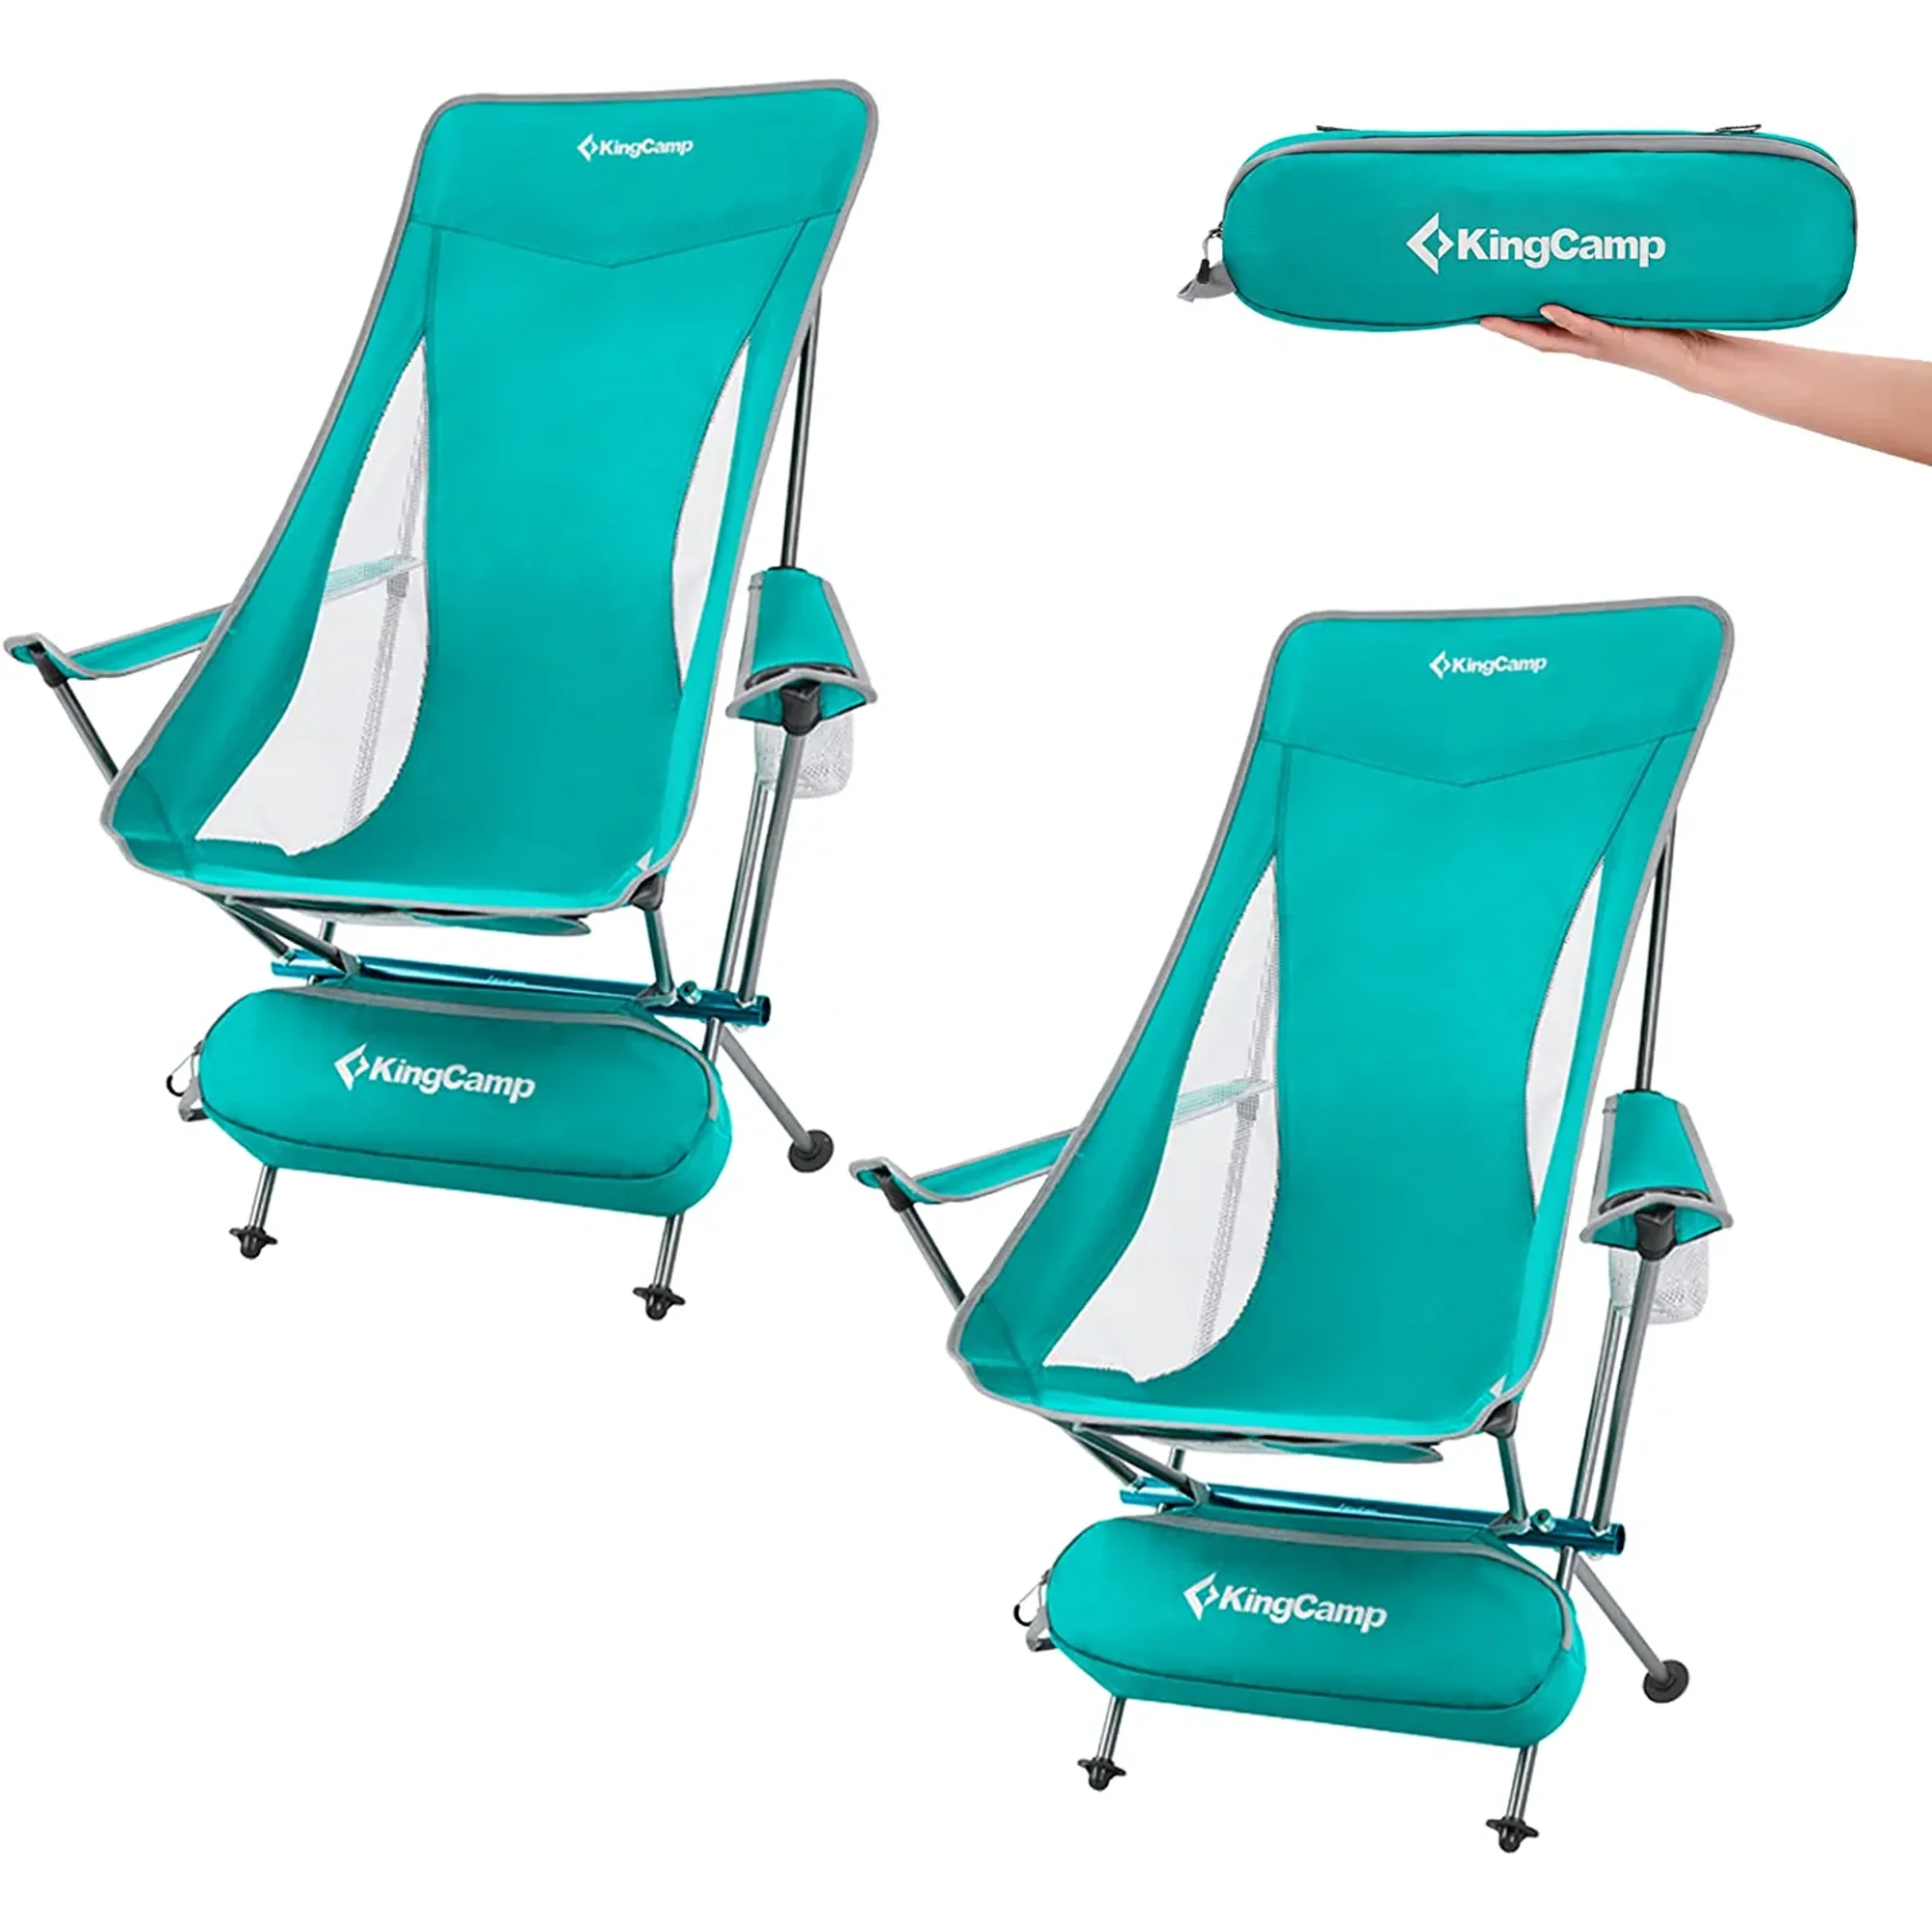 KingCamp Ultralight High Back Folding Camping Chairs Adults with Armrest for Outdoors with Carry Bag, 2 Pack, Cyan